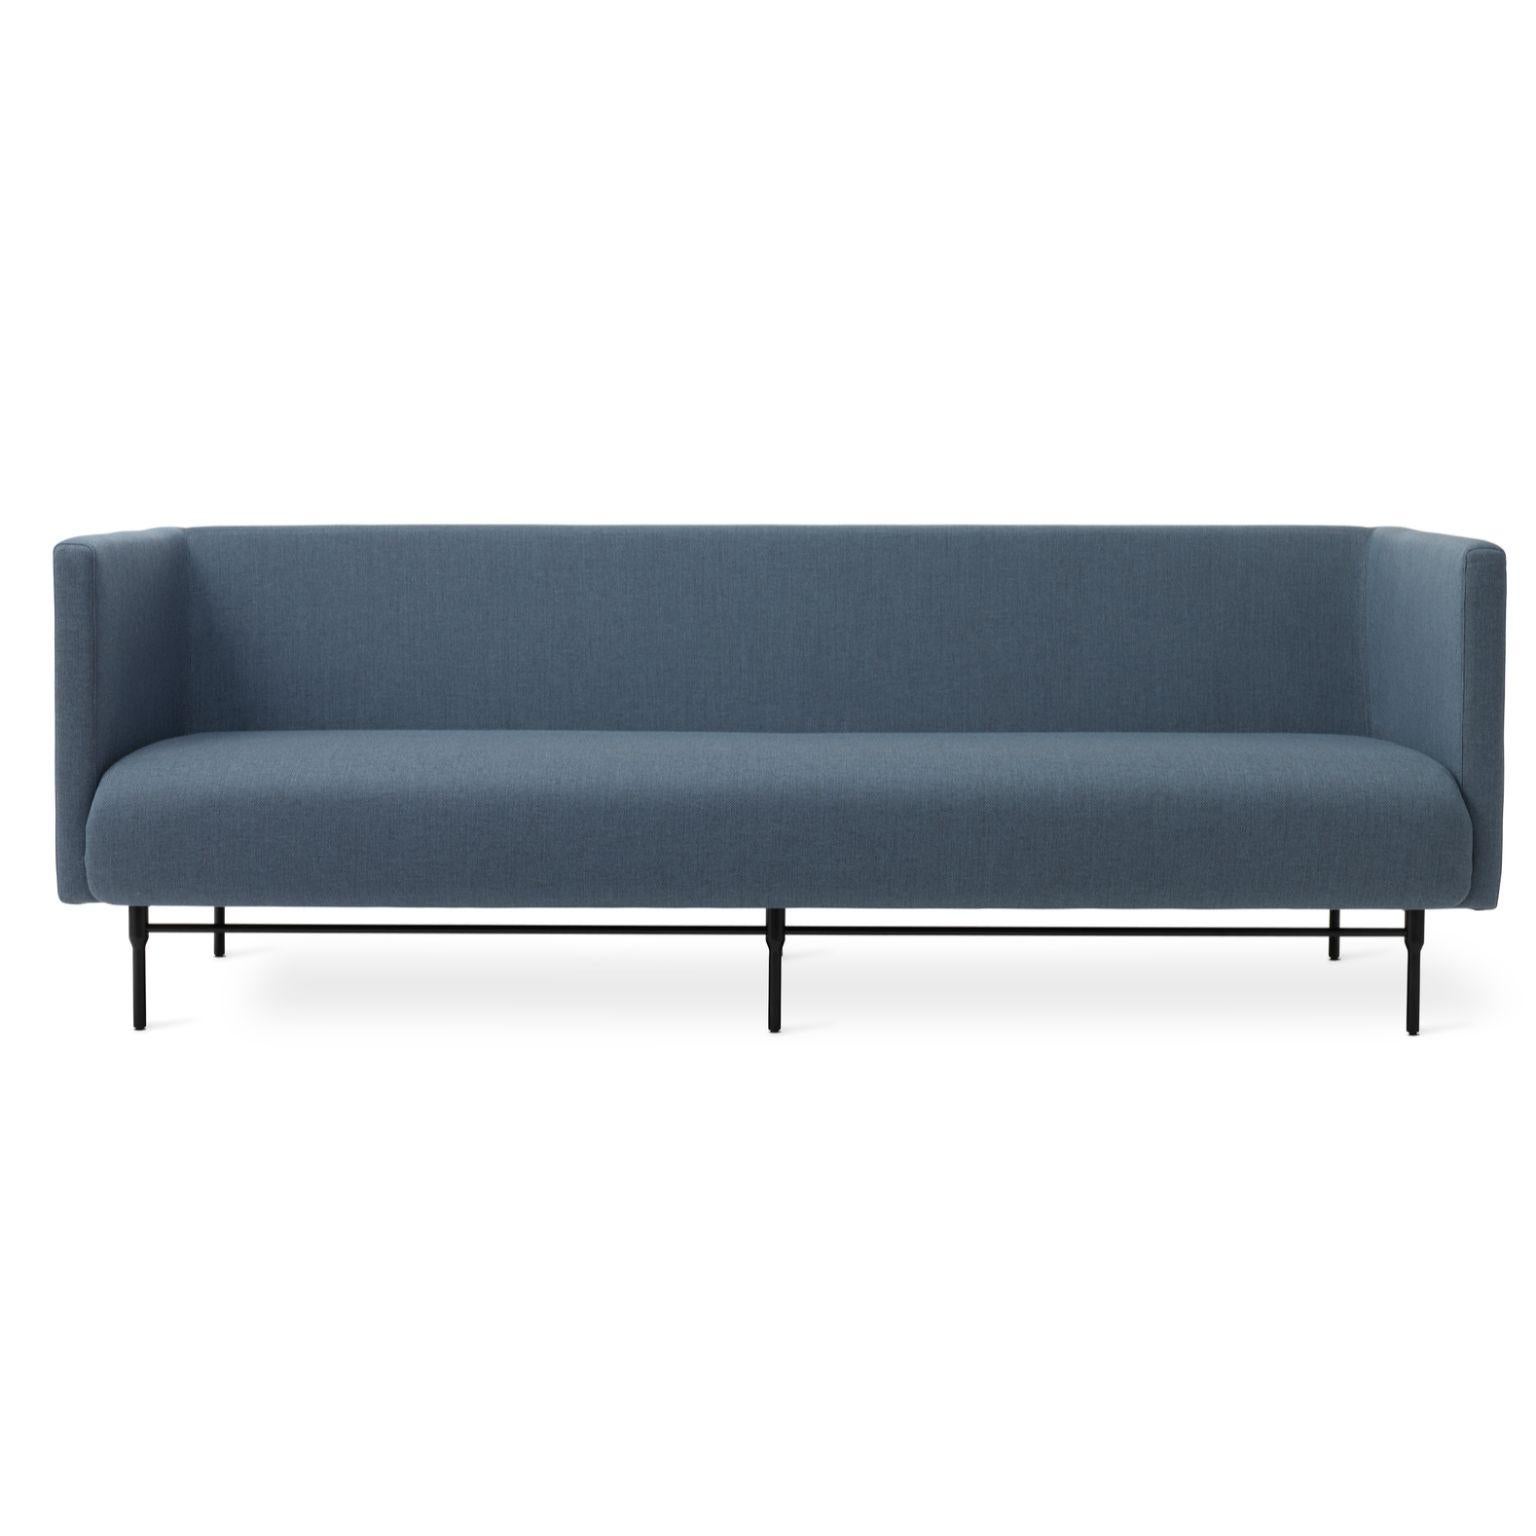 Galore 3 Seater Light Steel Blue by Warm Nordic
Dimensions: D222 x W83 x H 76 cm
Material: Textile upholstery, Powder coated black steel legs, Wooden frame, foam, spring system.
Weight: 62 kg
Also available in different colours and finishes.